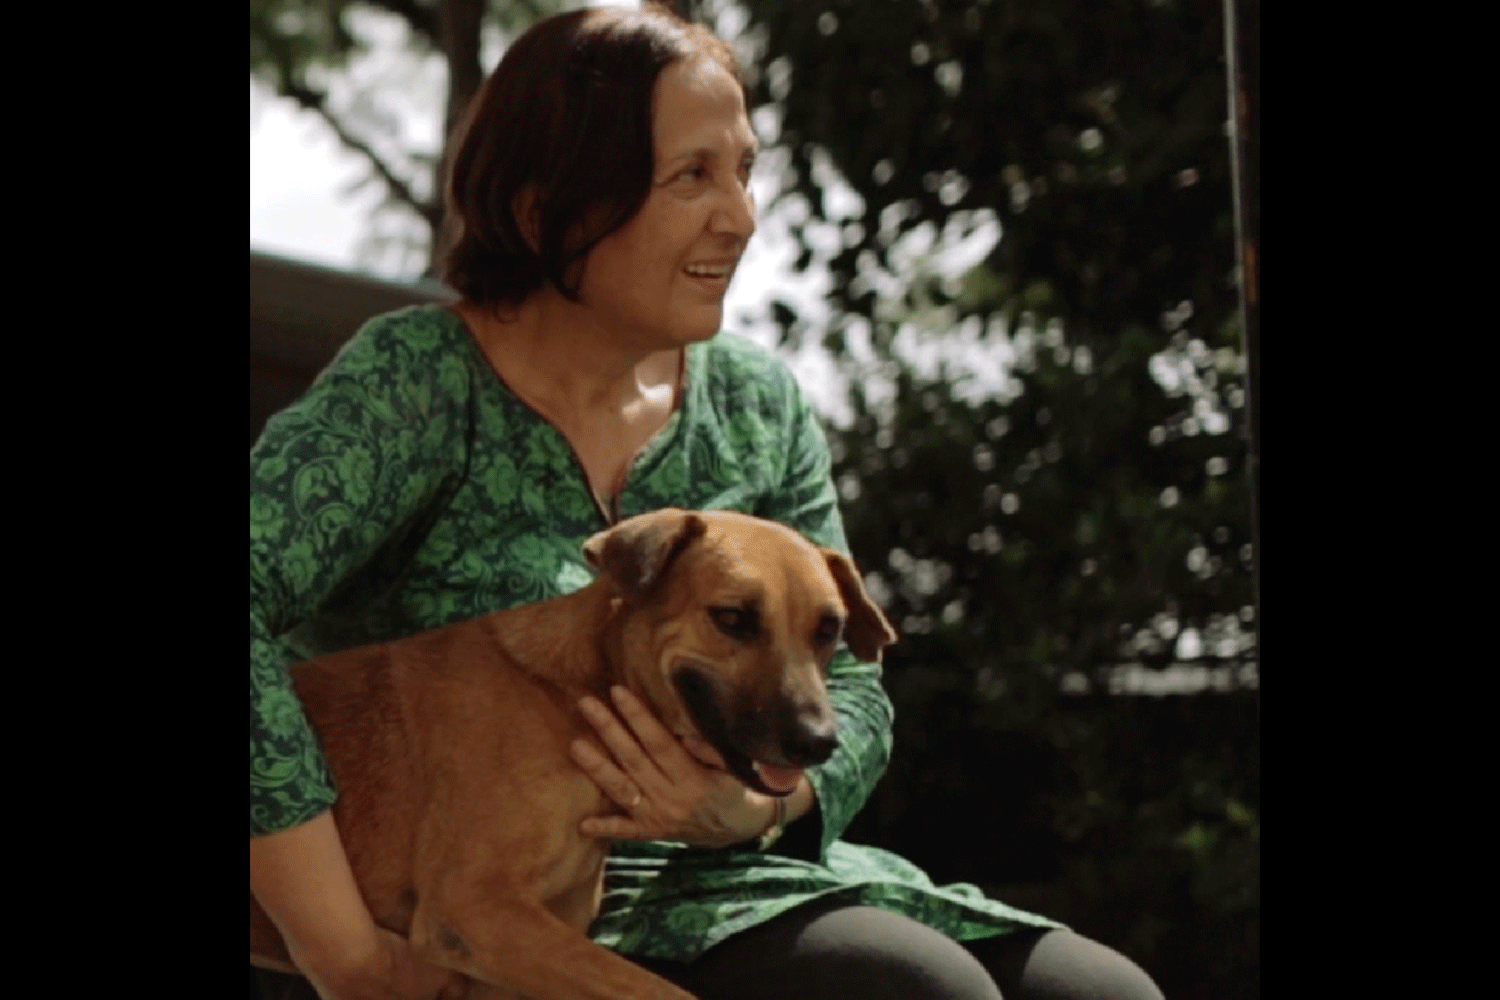 Meet Vivienne. She found her secret to happiness: dedicating her life to saving the street animals in India